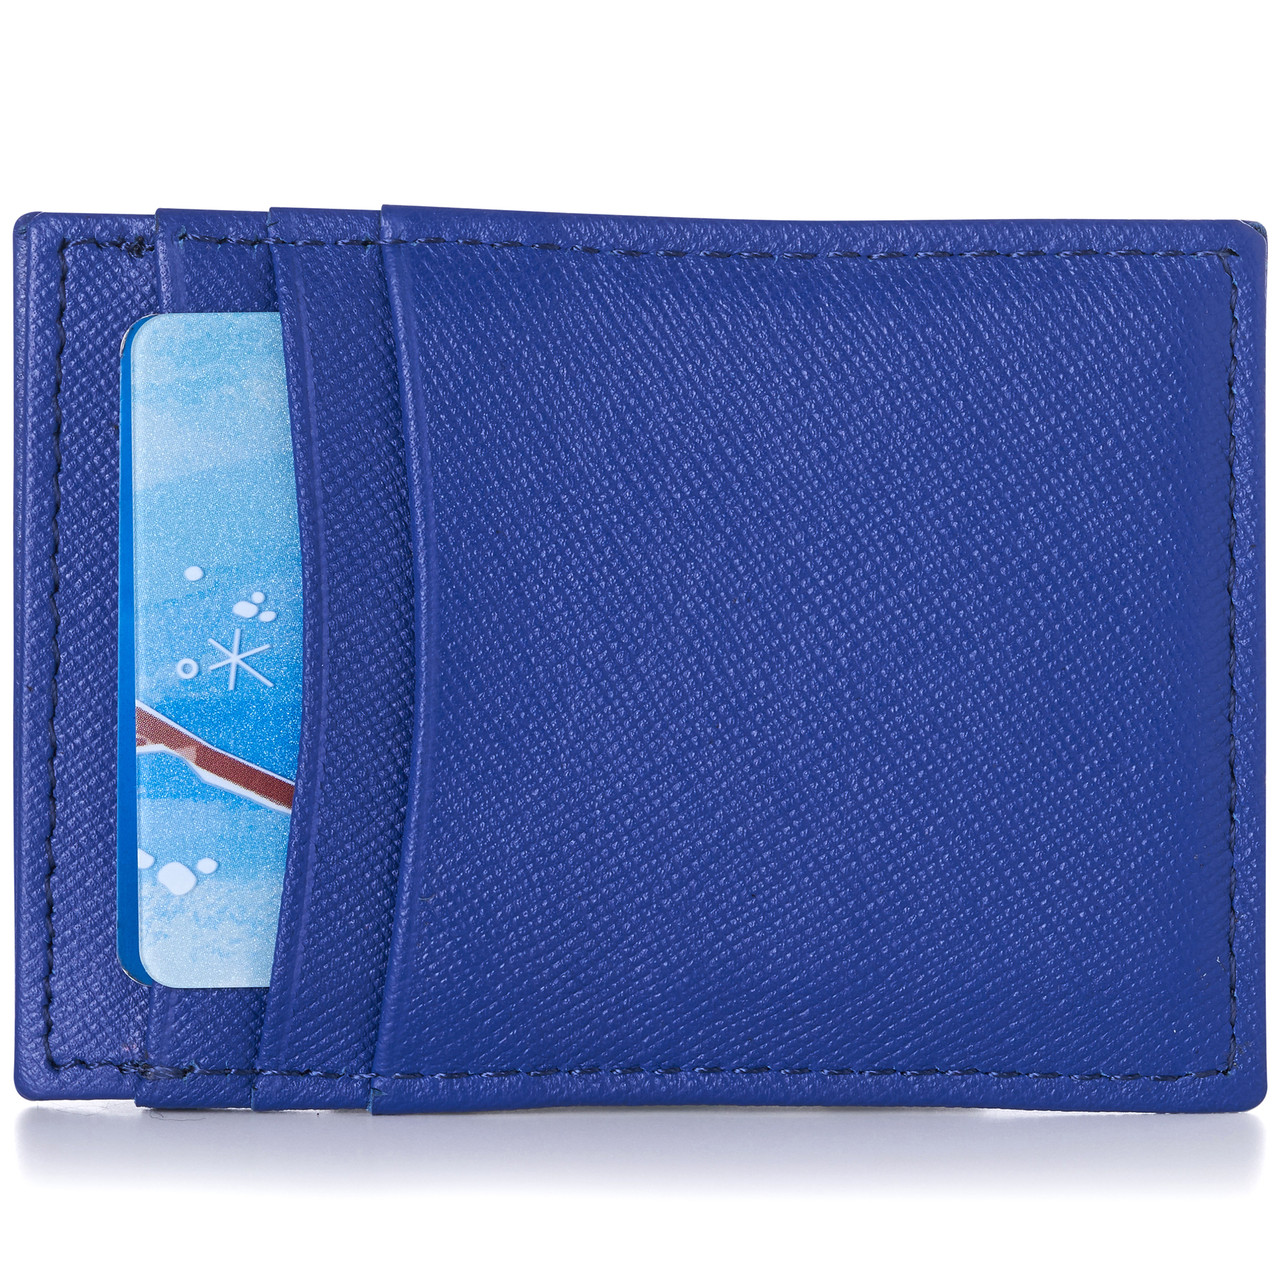 Genuine Leather Credit Card Holder Long Wallet with Snap Close Womens Mens